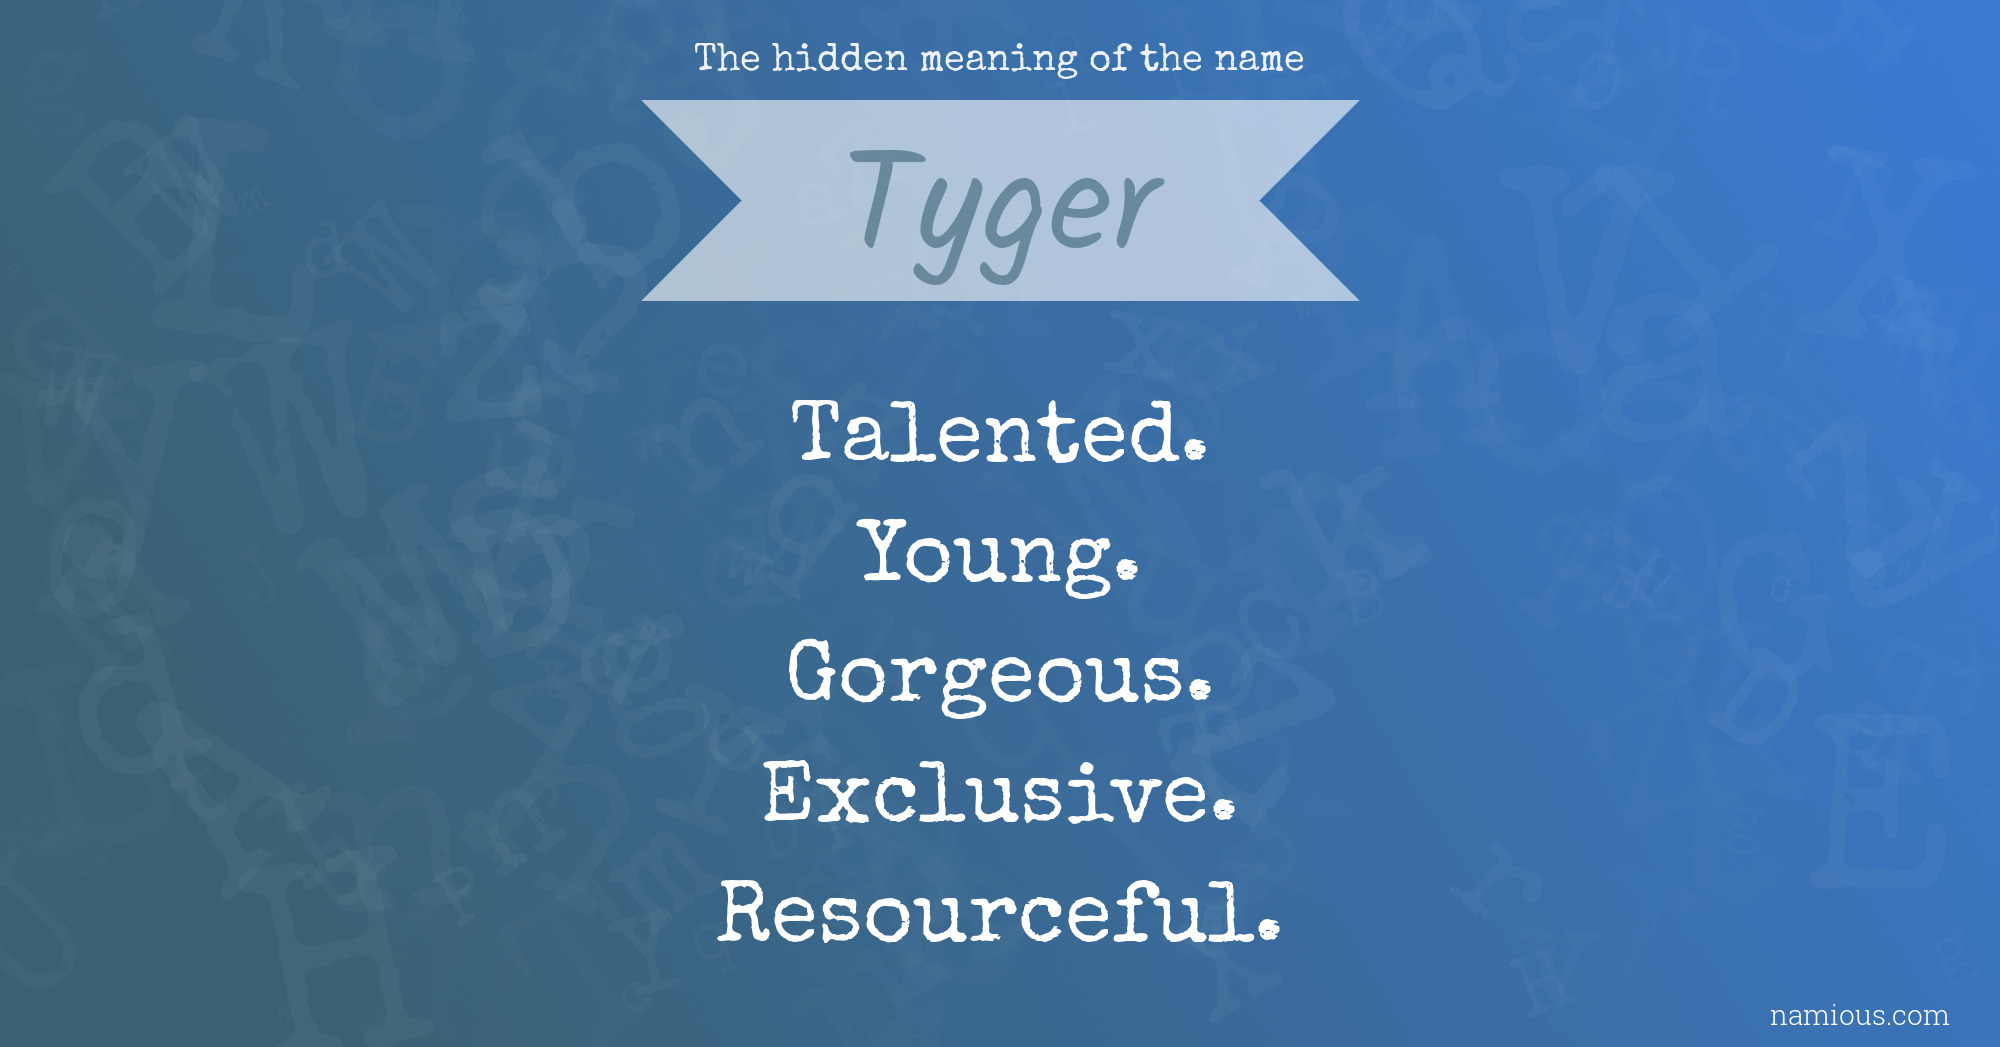 The hidden meaning of the name Tyger